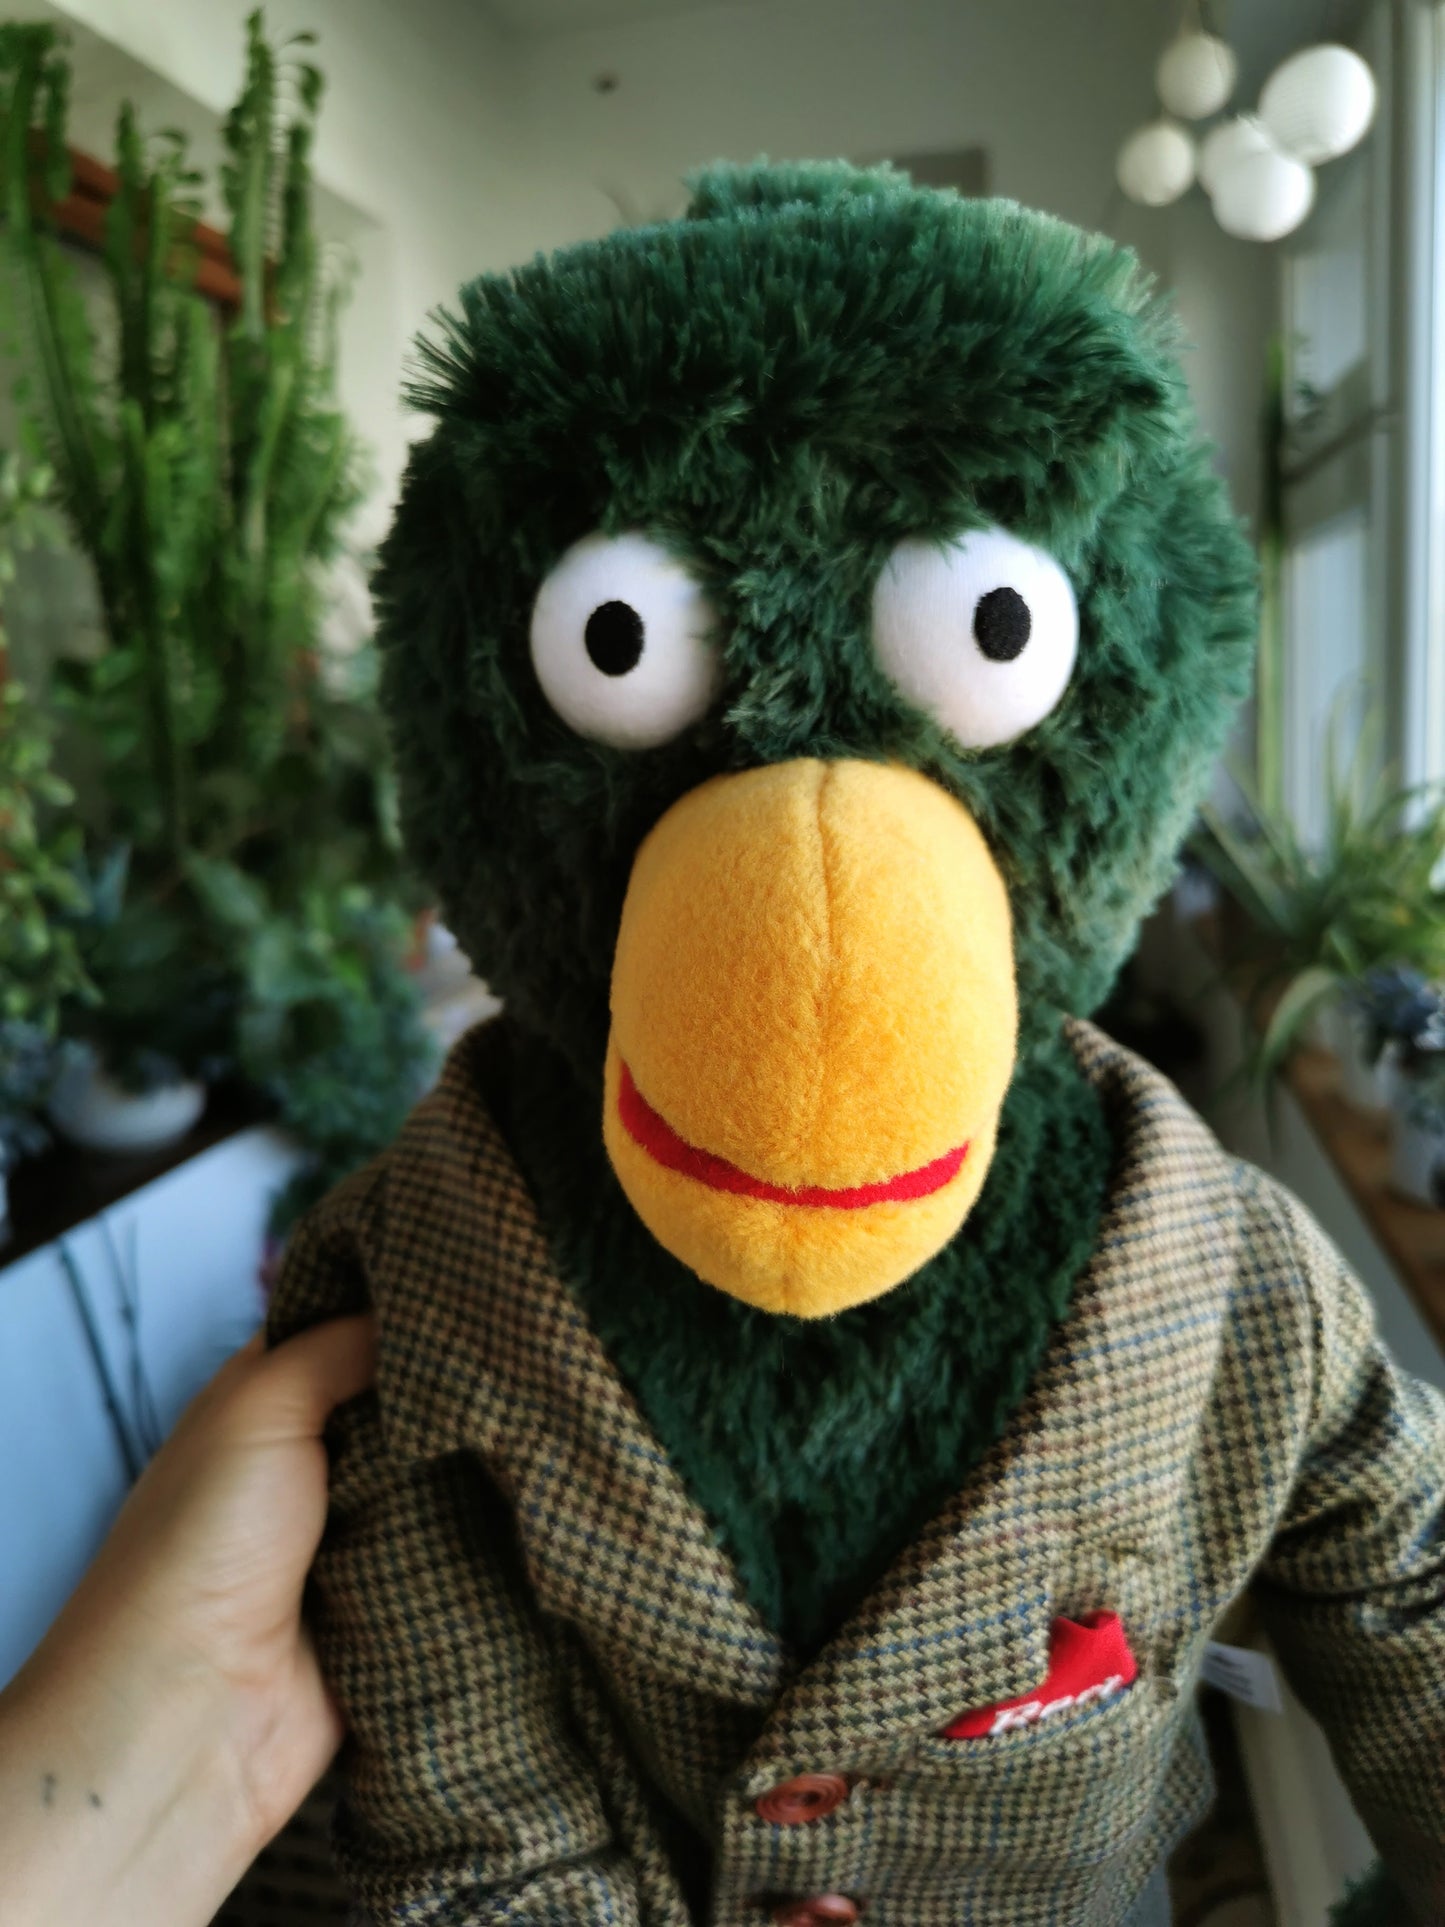 David Duck, Don't Hug Me I'm Scared replica collector's plush, Custom green duck plush inspired by DHMIS, David duck in suit 50 cm